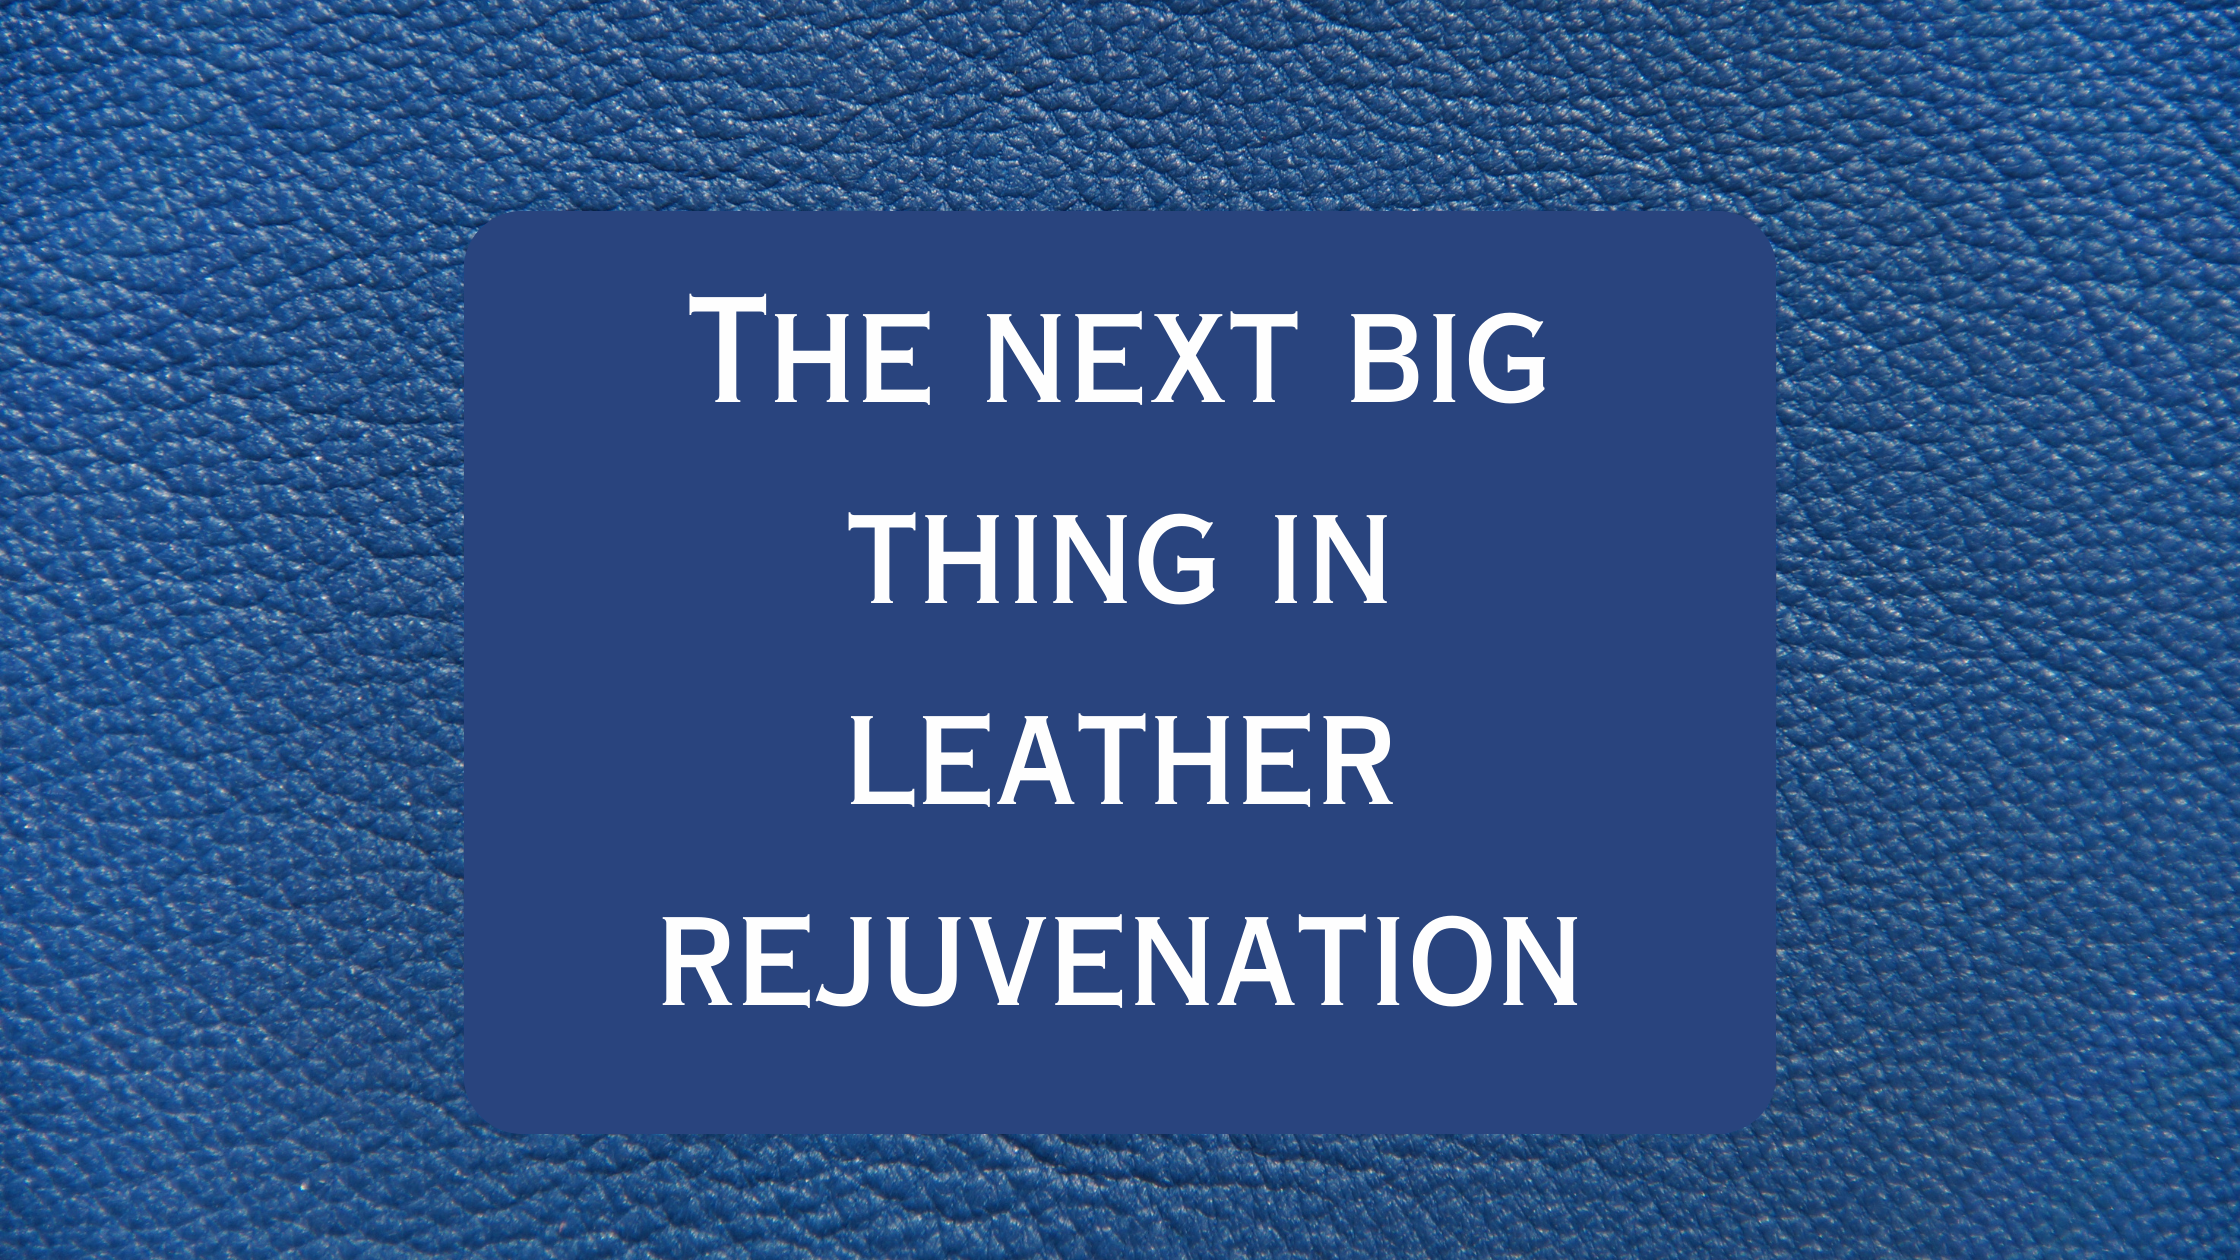 The next big thing in leather rejuvenation - Commercial Leather Cleaning Service 13